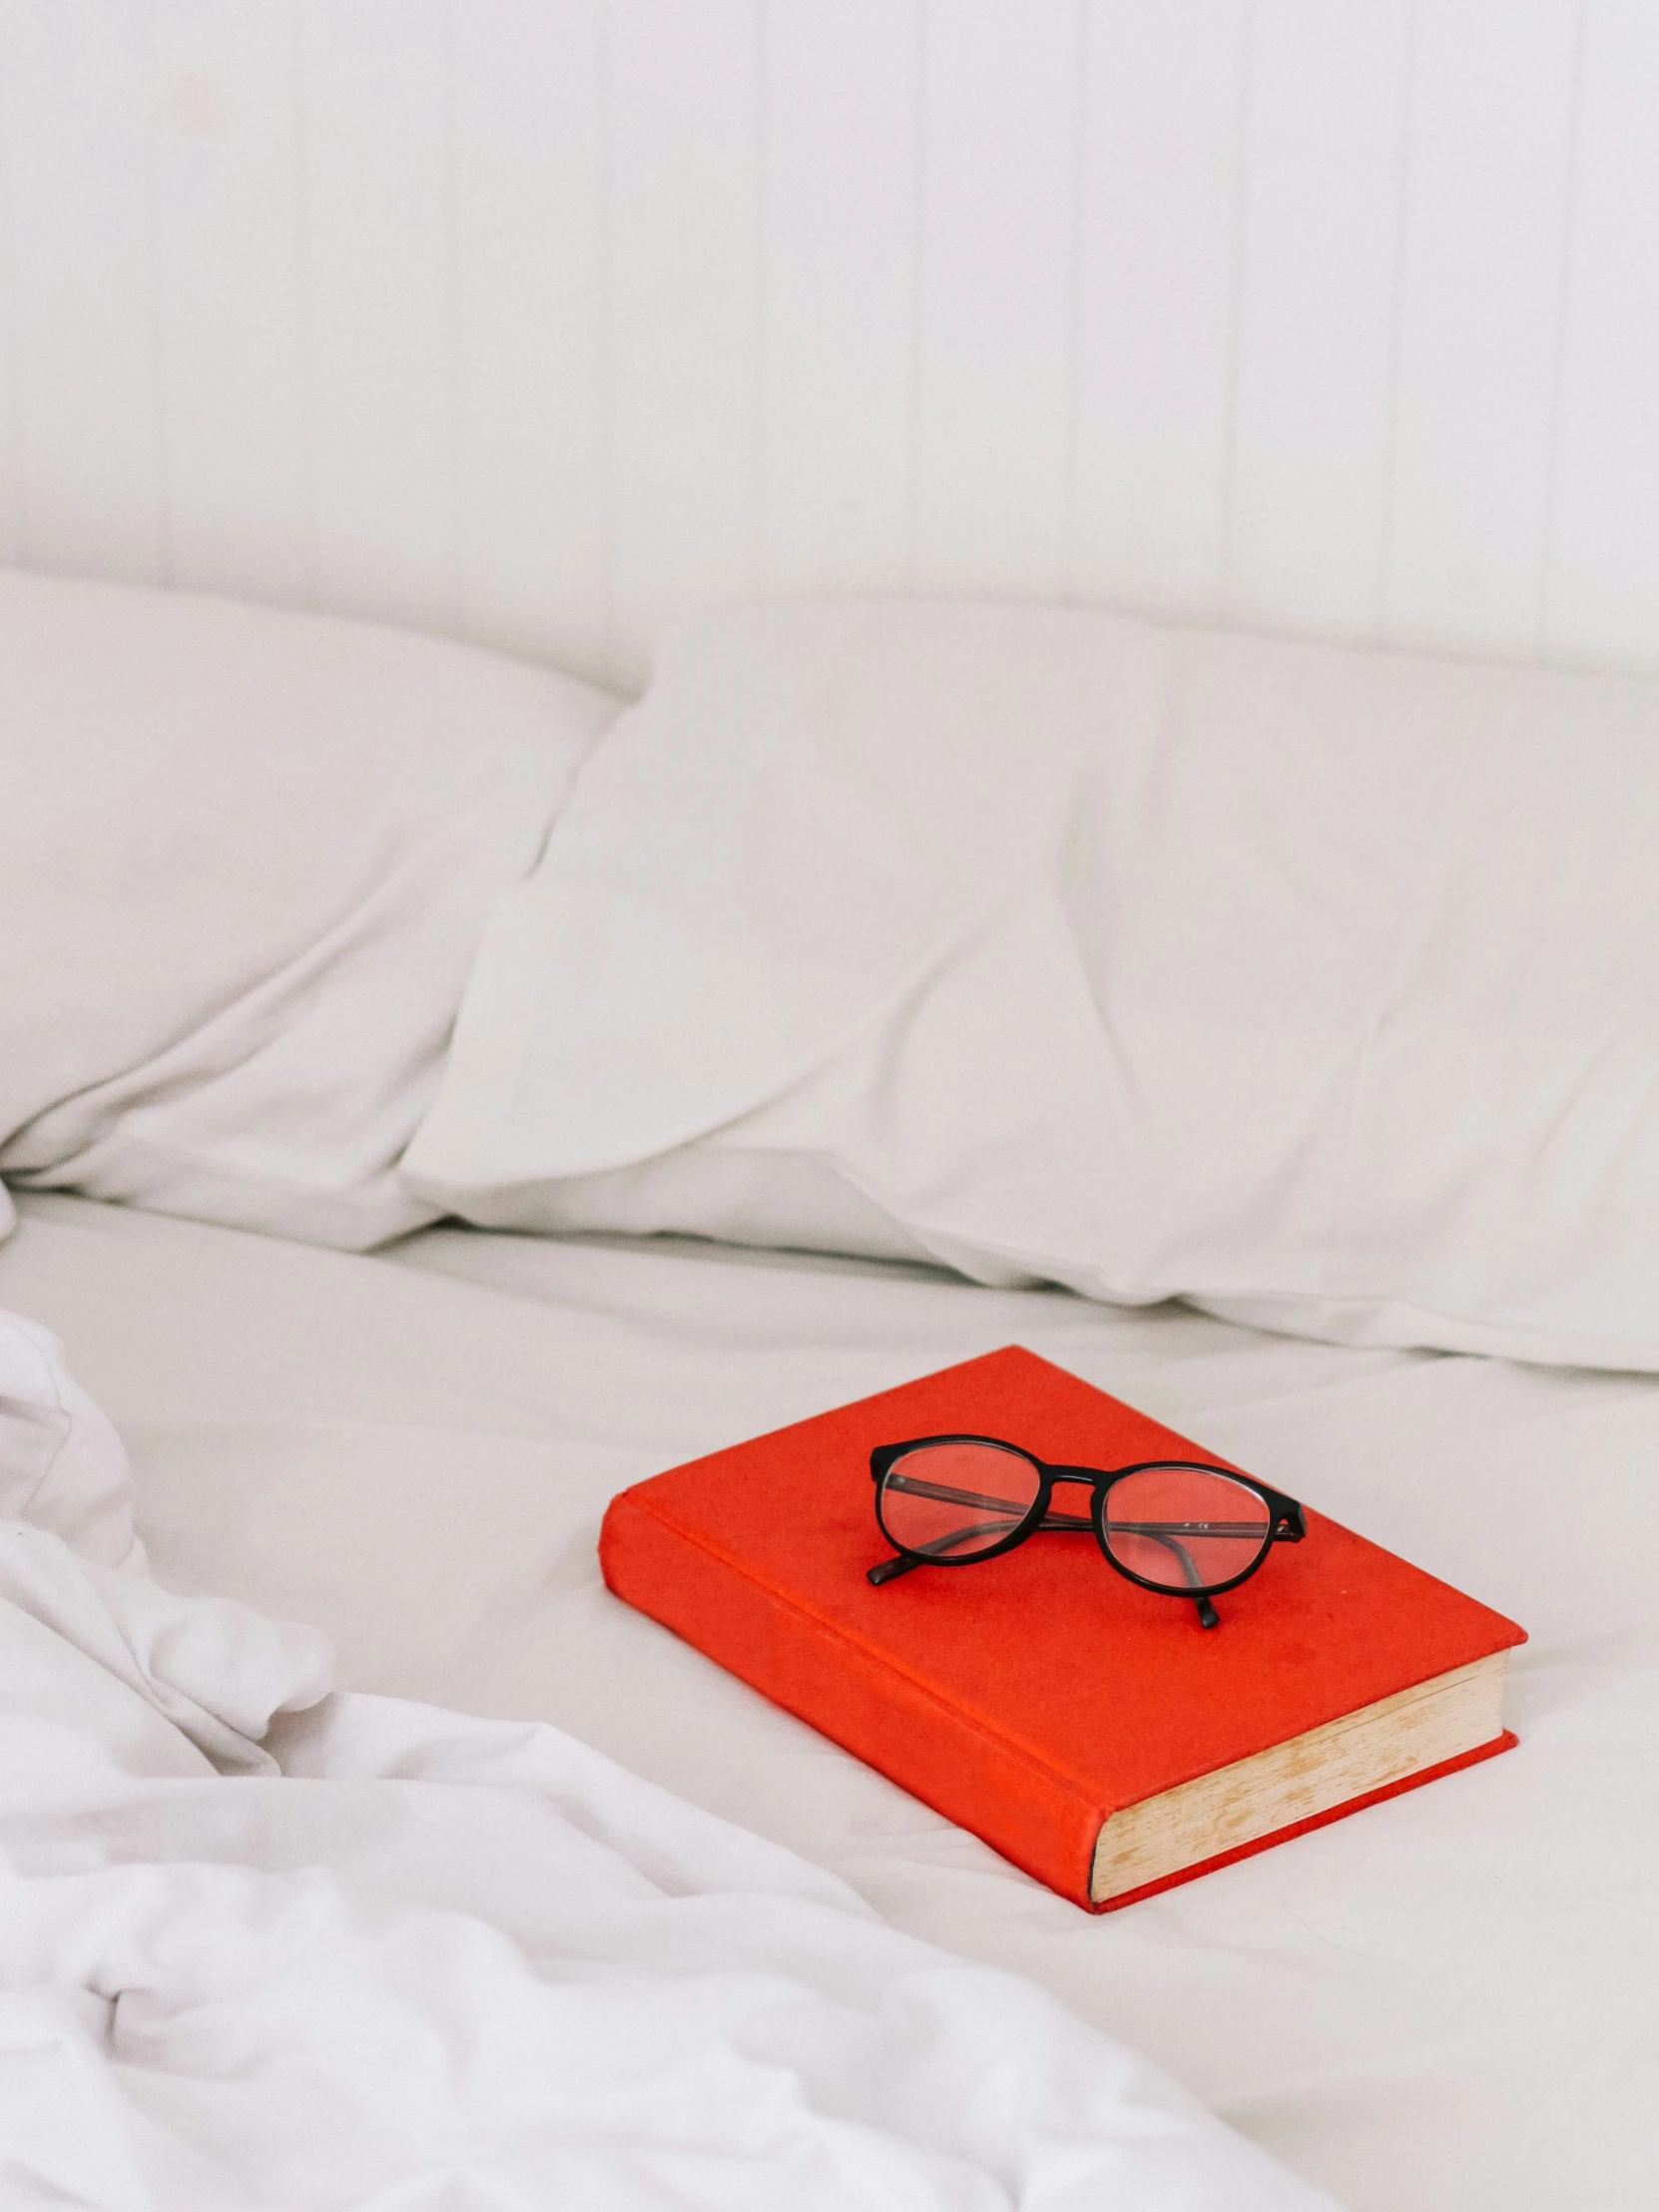 a book, pair of glasses, and white sheets on a bed